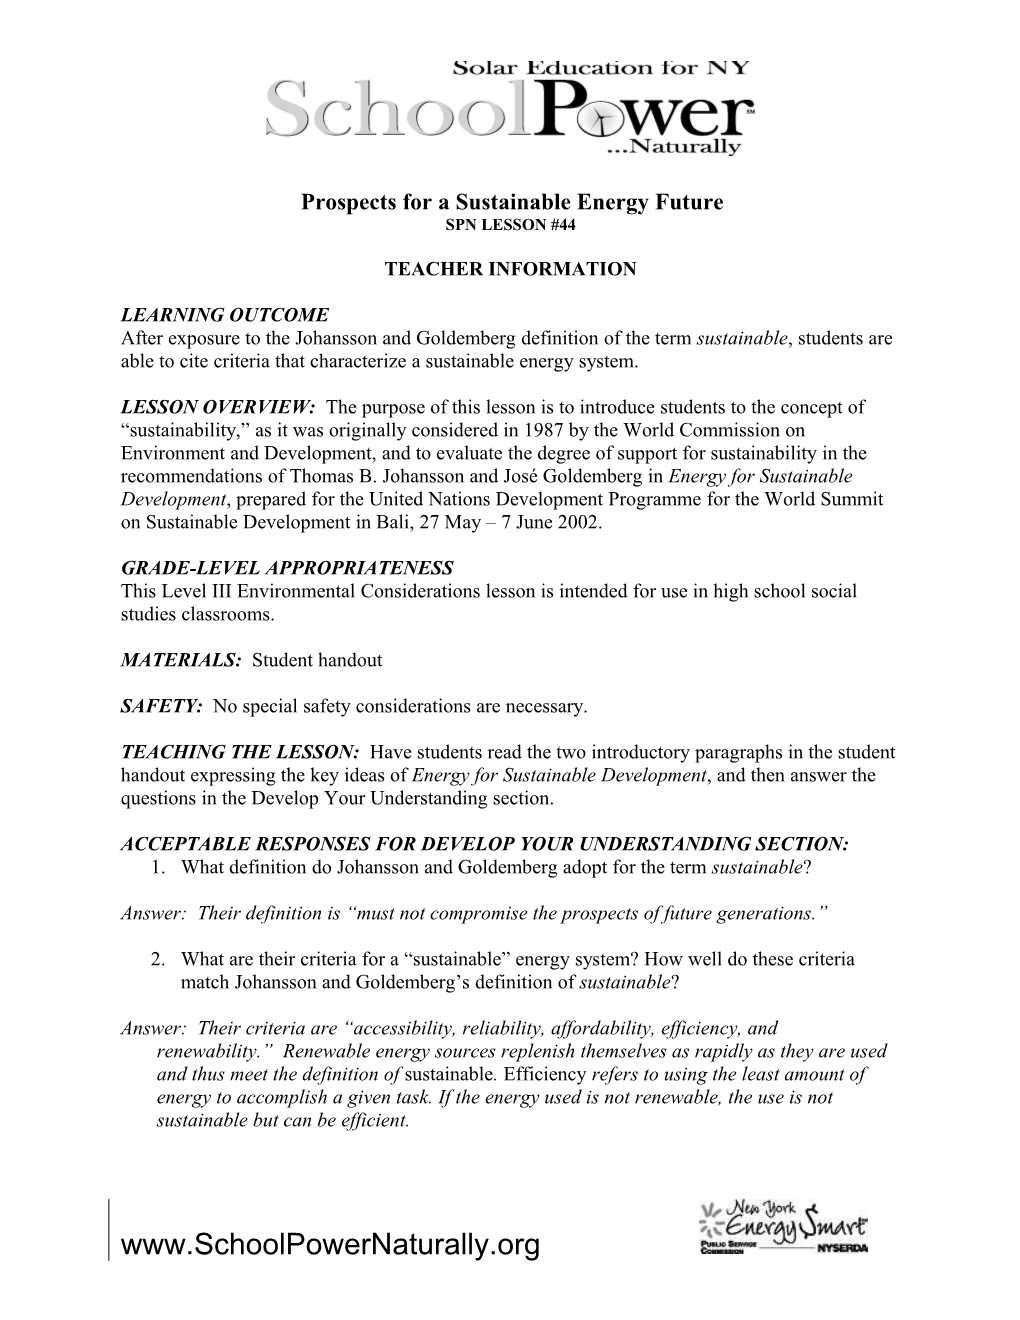 Prospects for a Sustainable Energy Future SPN#44